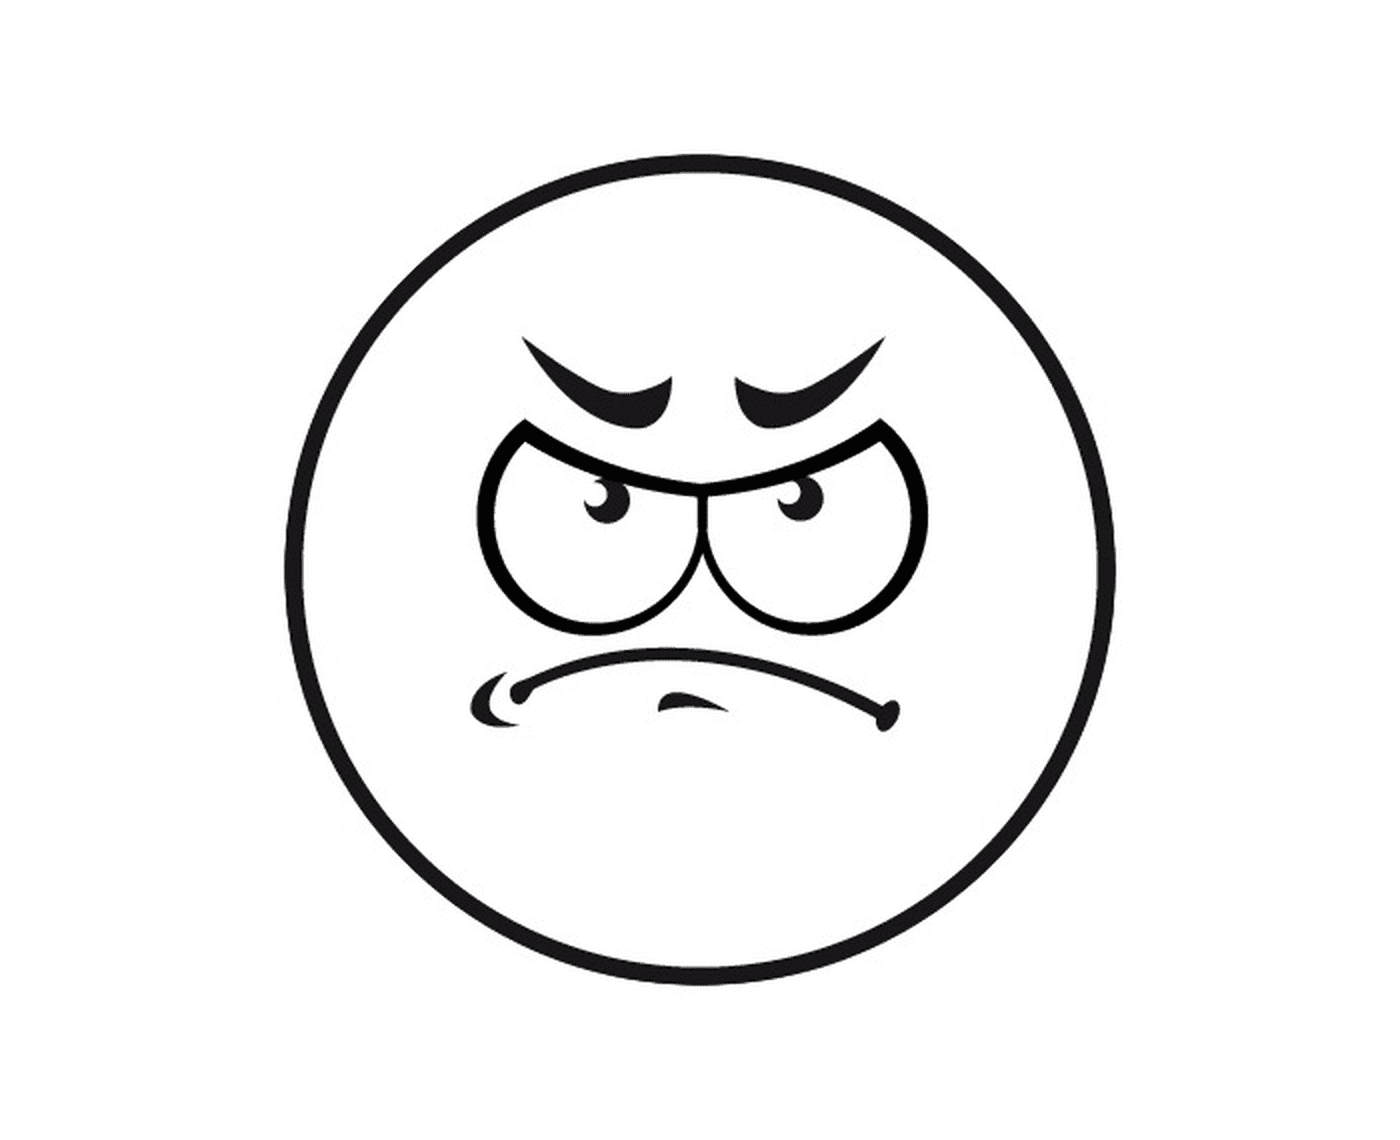  Face angry in circle 